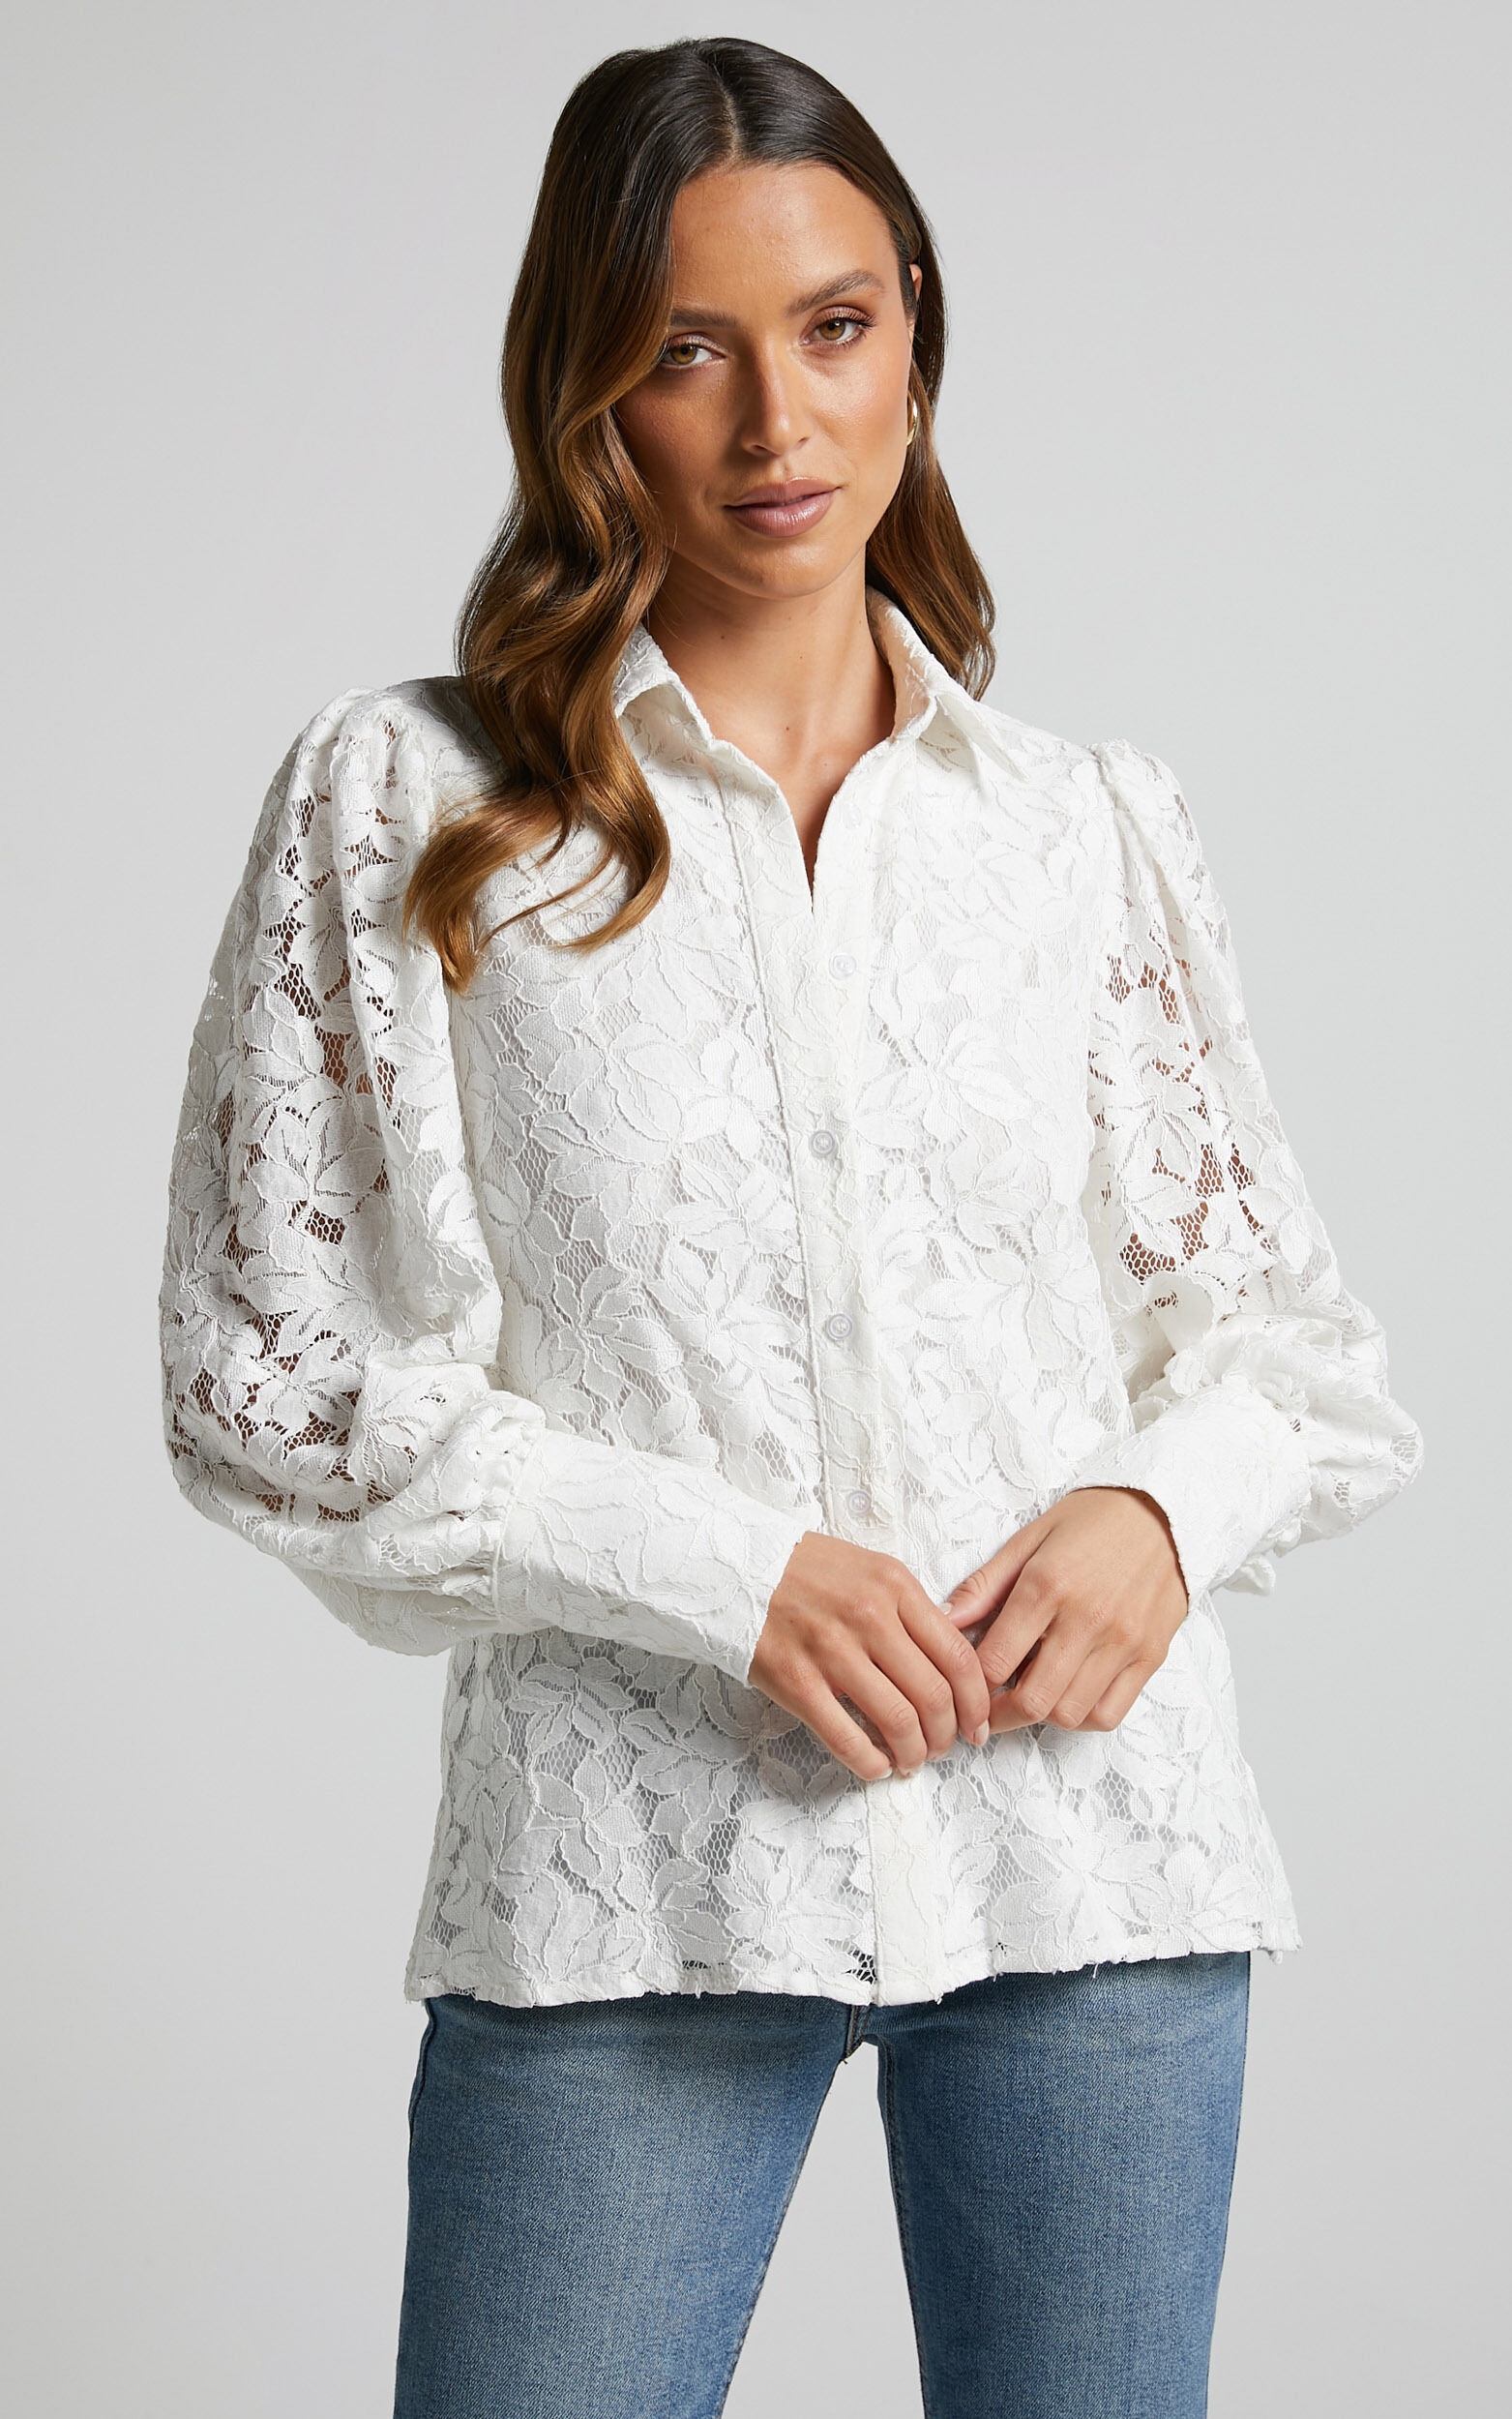 Meghan Ballon Long Sleeve Lace Button Up Shirt in White - 06, WHT1, super-hi-res image number null